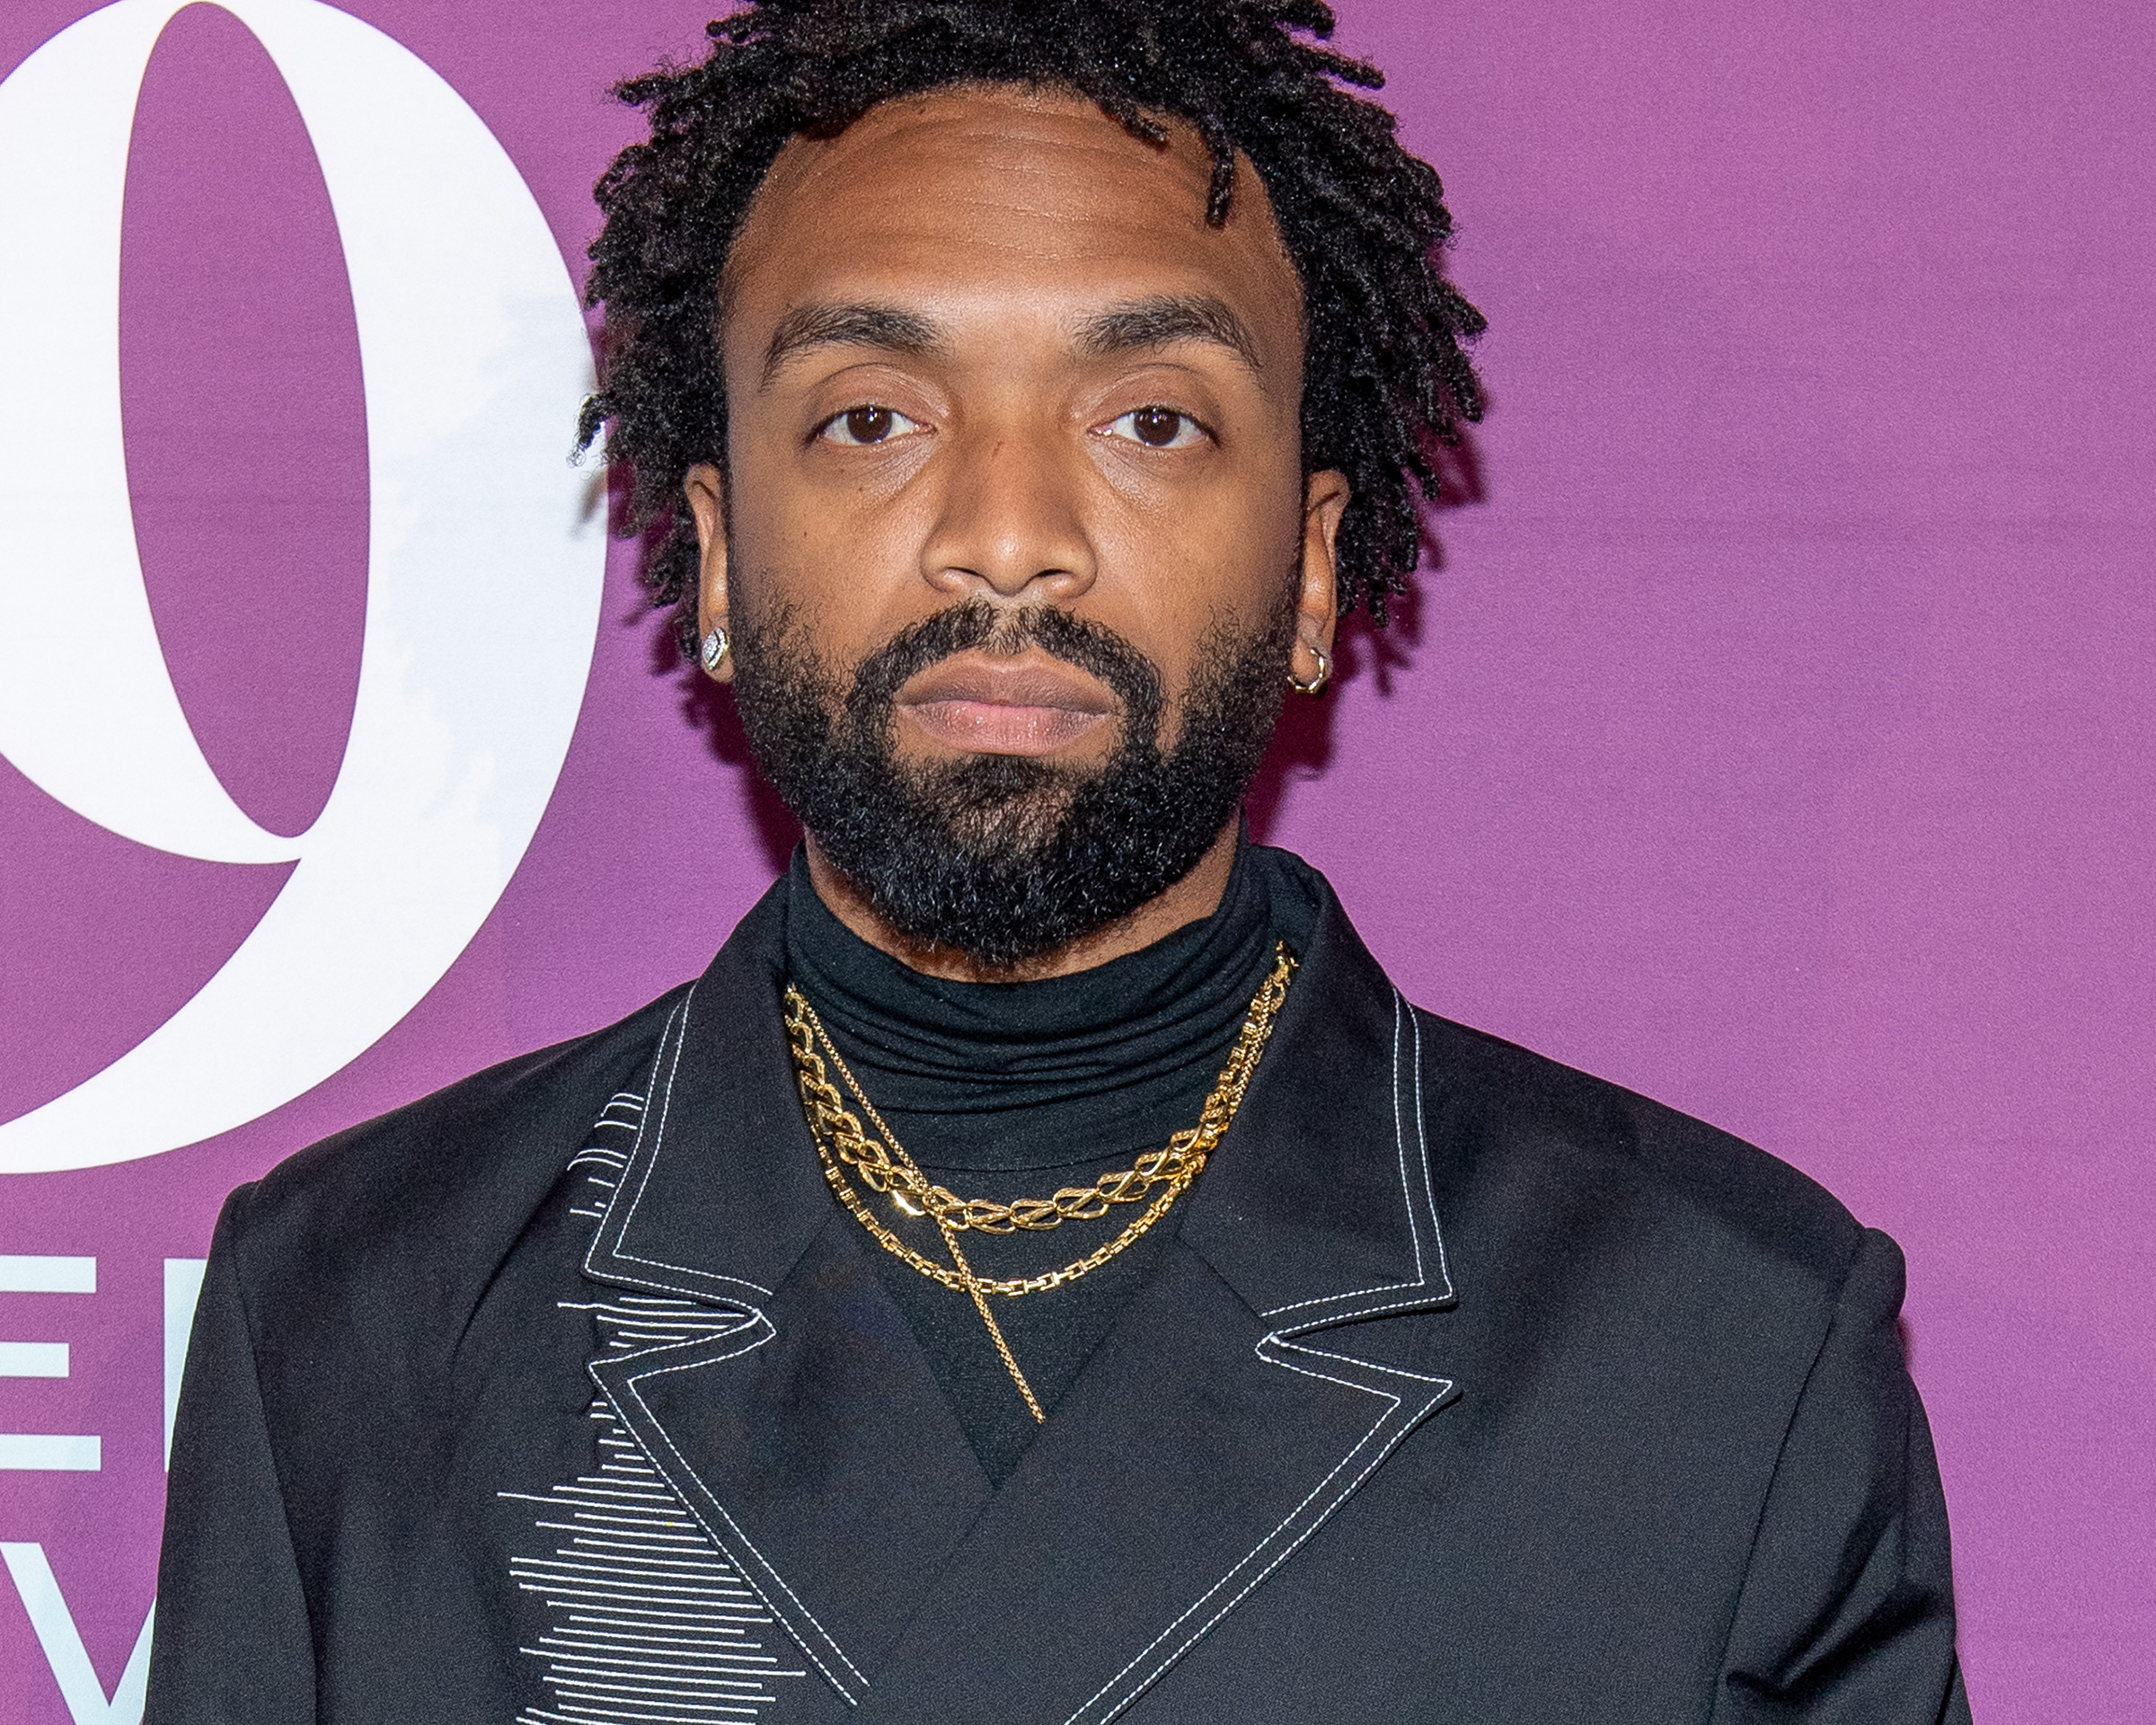 Kerby Jean-Raymond at the 2019 FN Achievement Awards wearing his Pyer Moss suit with John Hardy gold chain necklaces, a diamond Cuban link ring and a white and yellow diamond ring by Shelley & Co